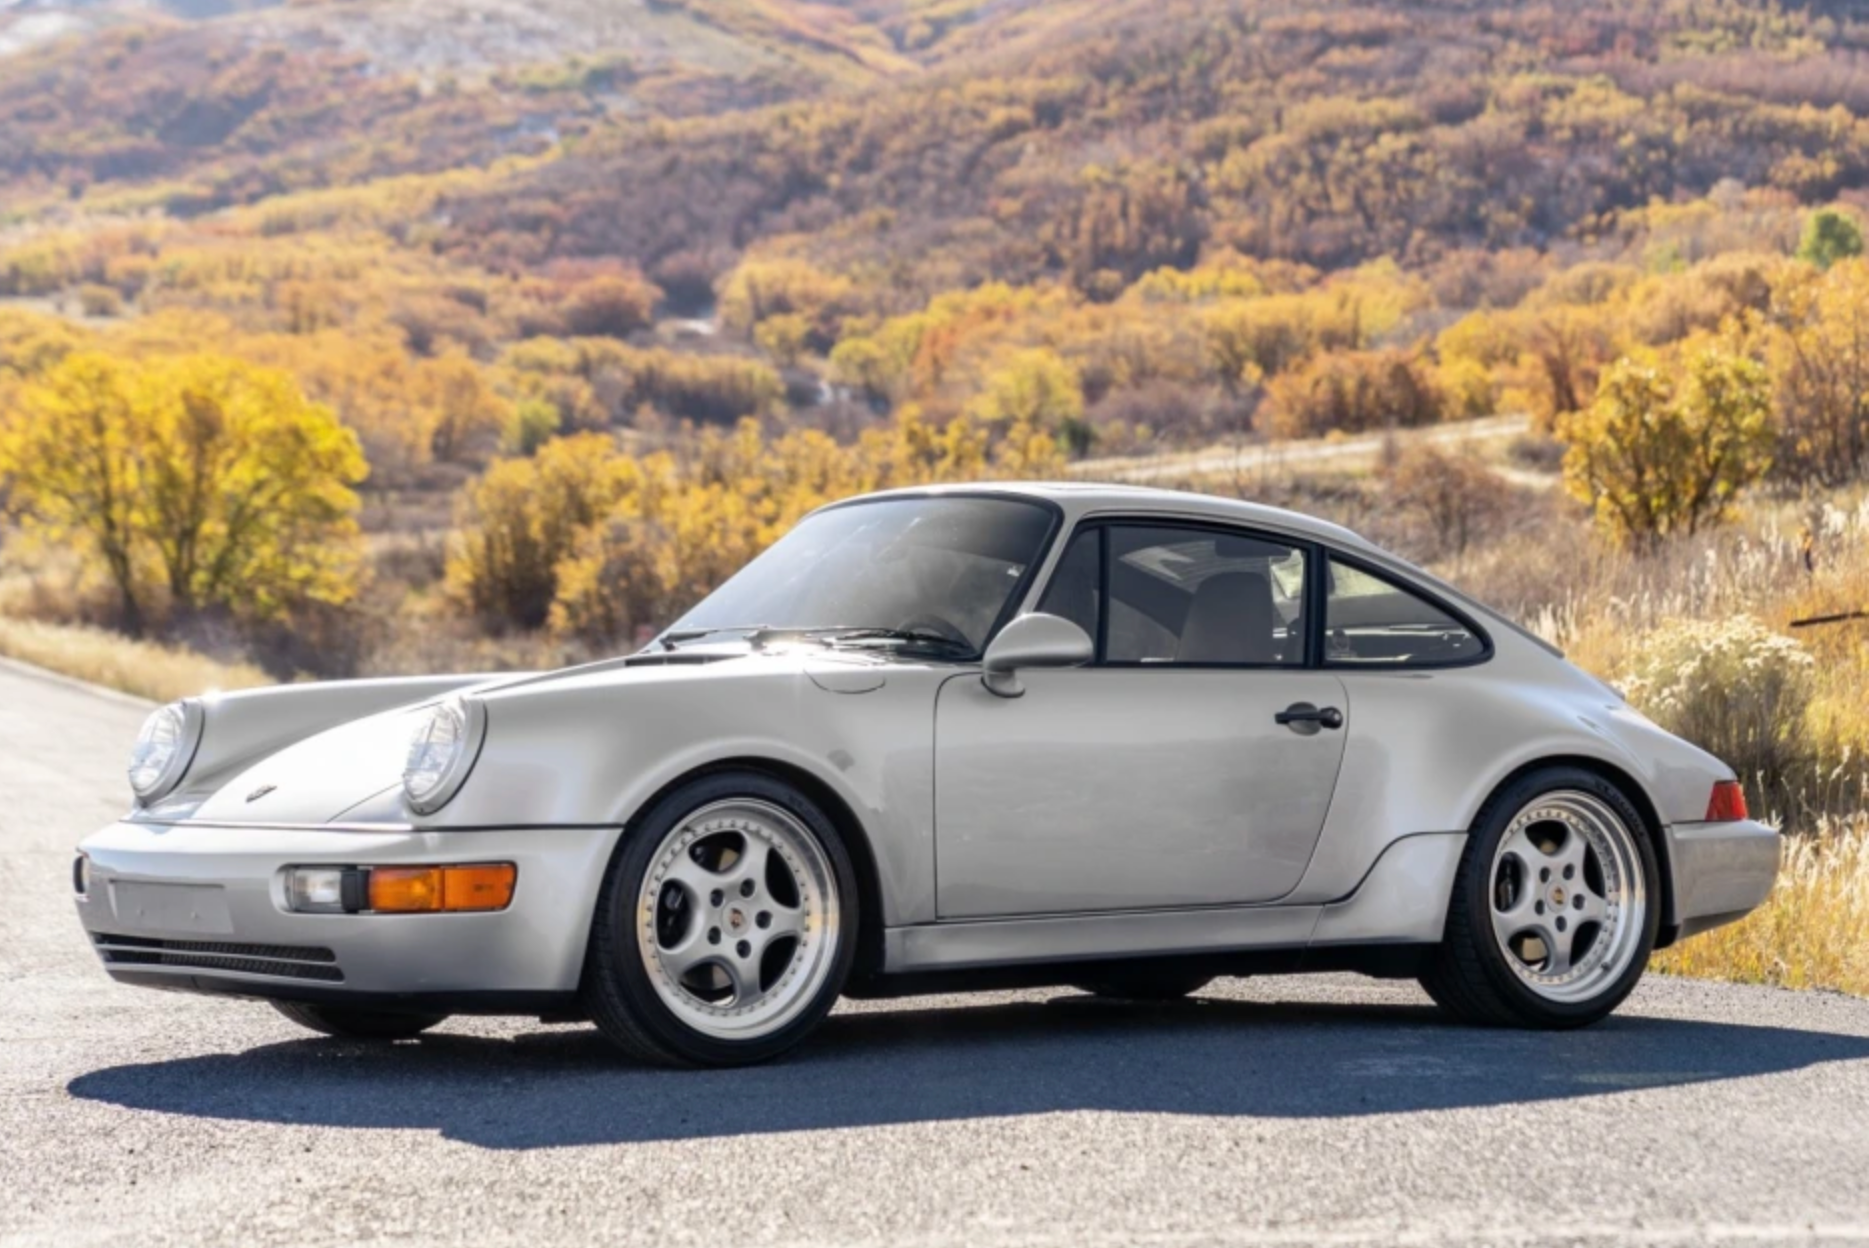 1994 Porsche 911 - 1994 Porsche 964 - FACTORY WIDEBODY 1 of 267 - Used - VIN WP0AB2964RS420430 - 6 cyl - 4WD - Manual - Coupe - Silver - Liberty Hill, TX 78642, United States